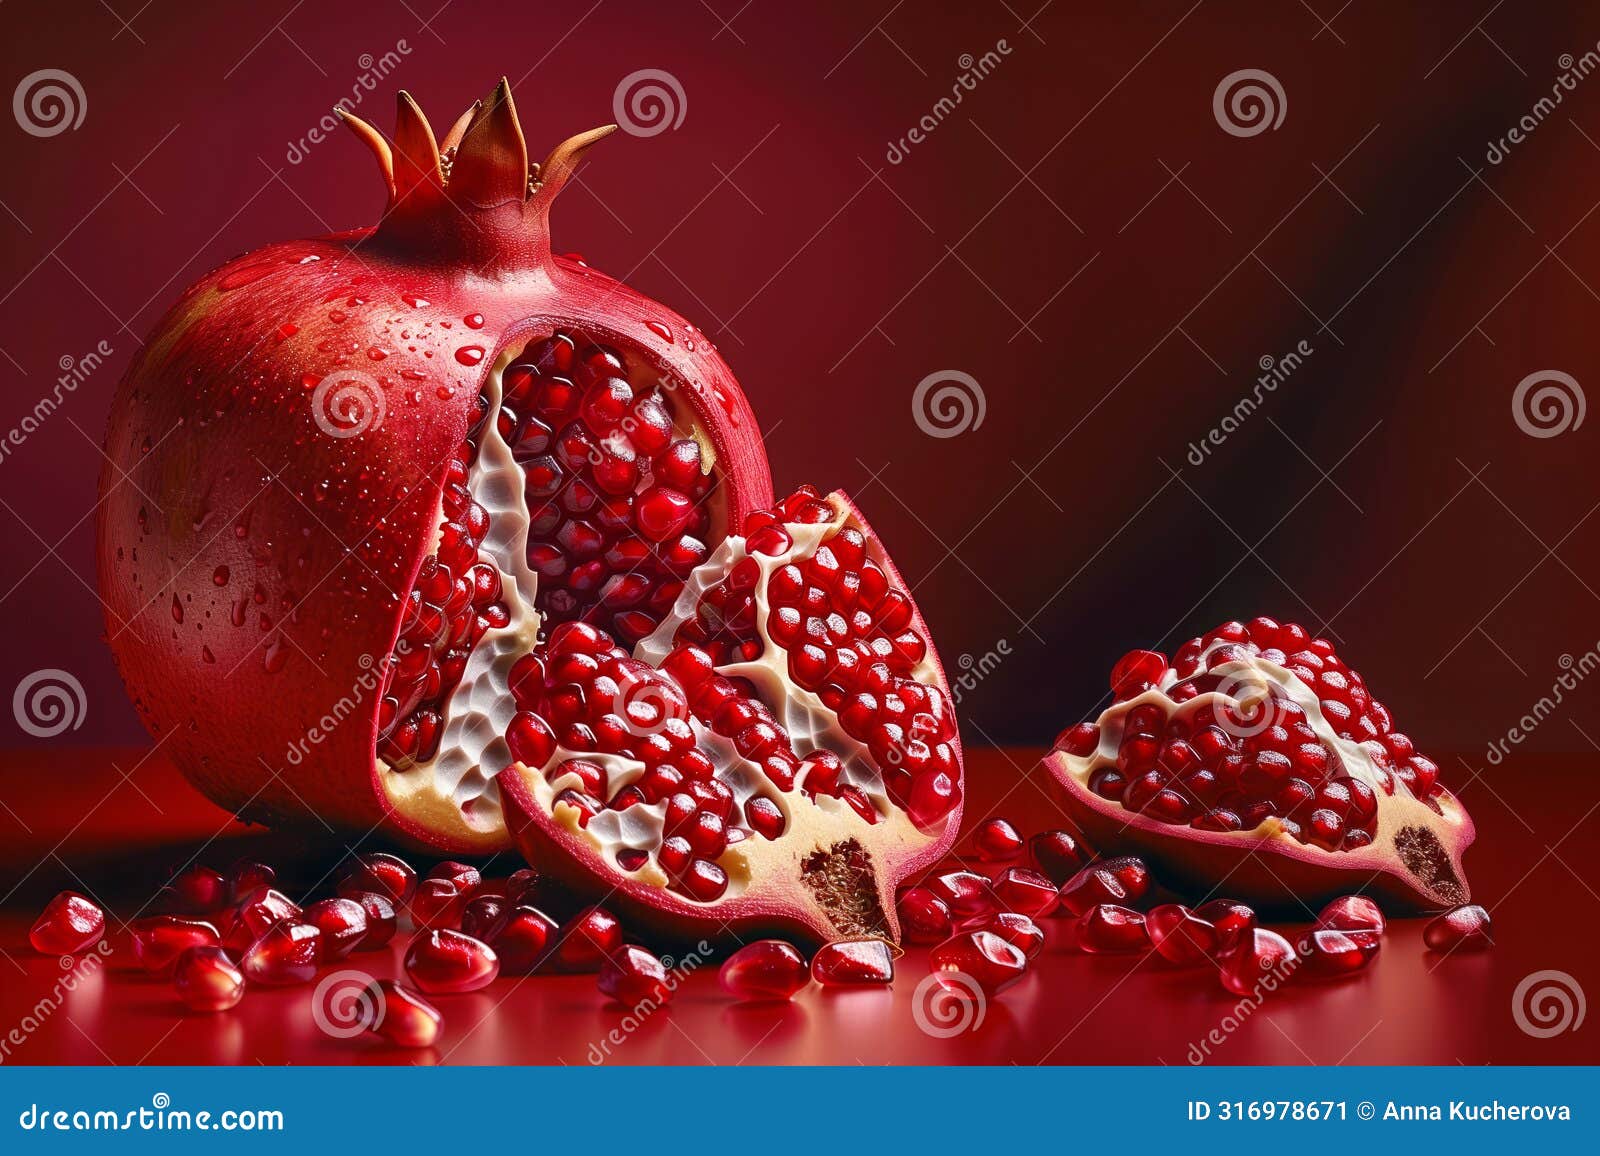 whole and segmented pomegranates with scattered seeds